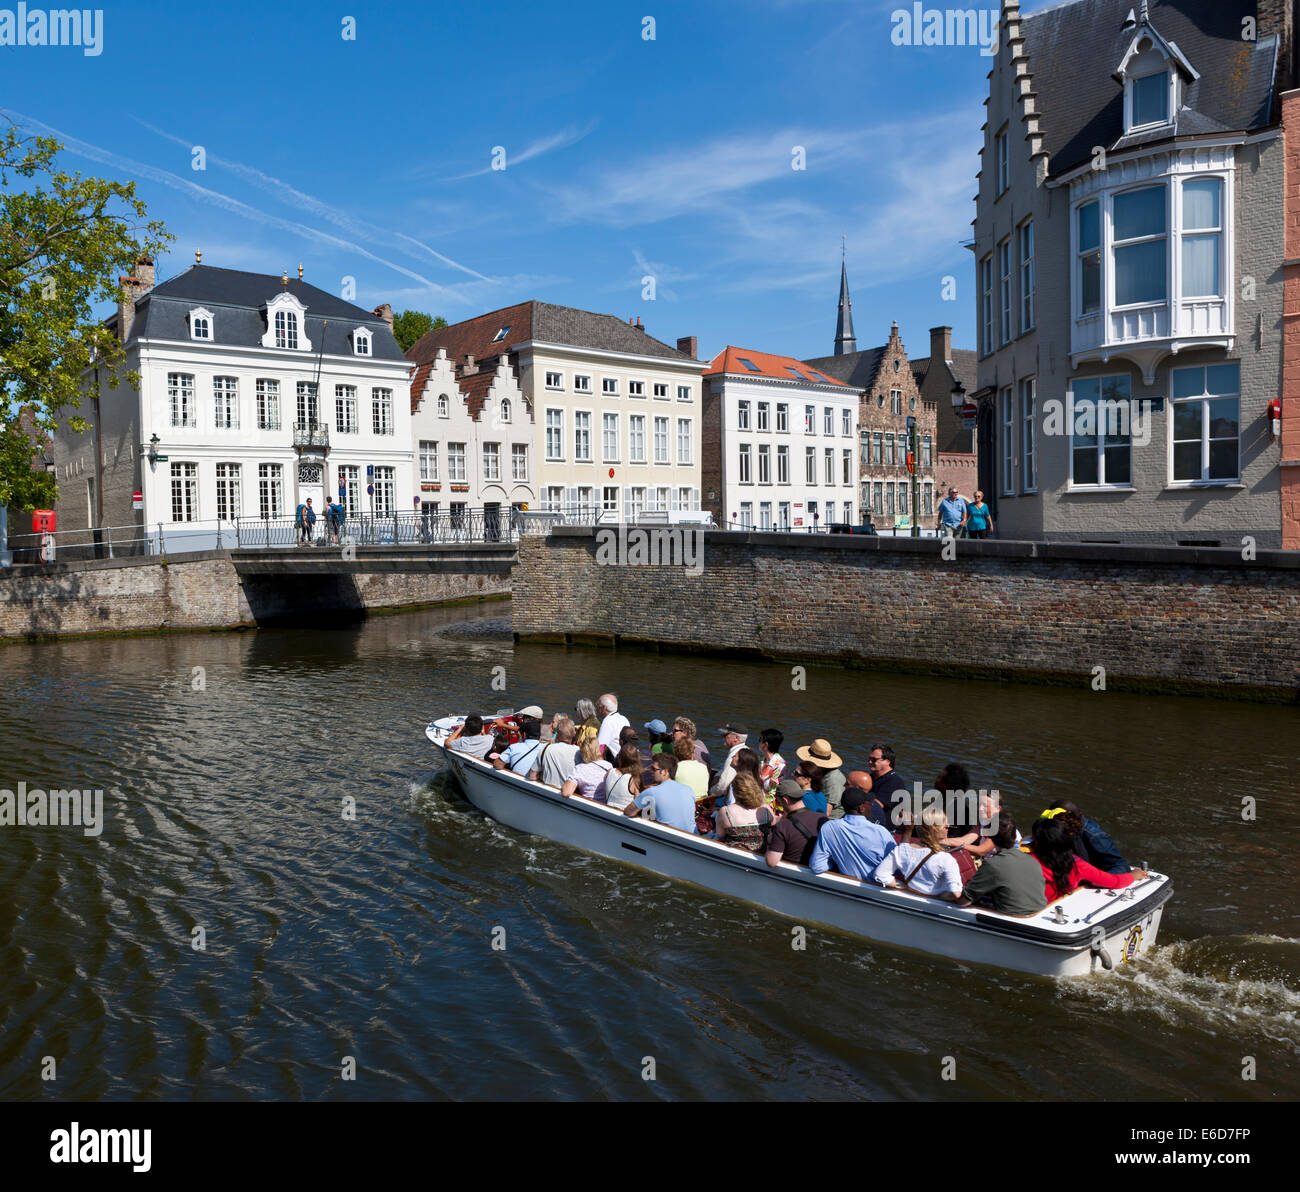 Belgium, Flanders, West Flanders, Bruges, excursion boat with tourists on sightseeing Stock Photo